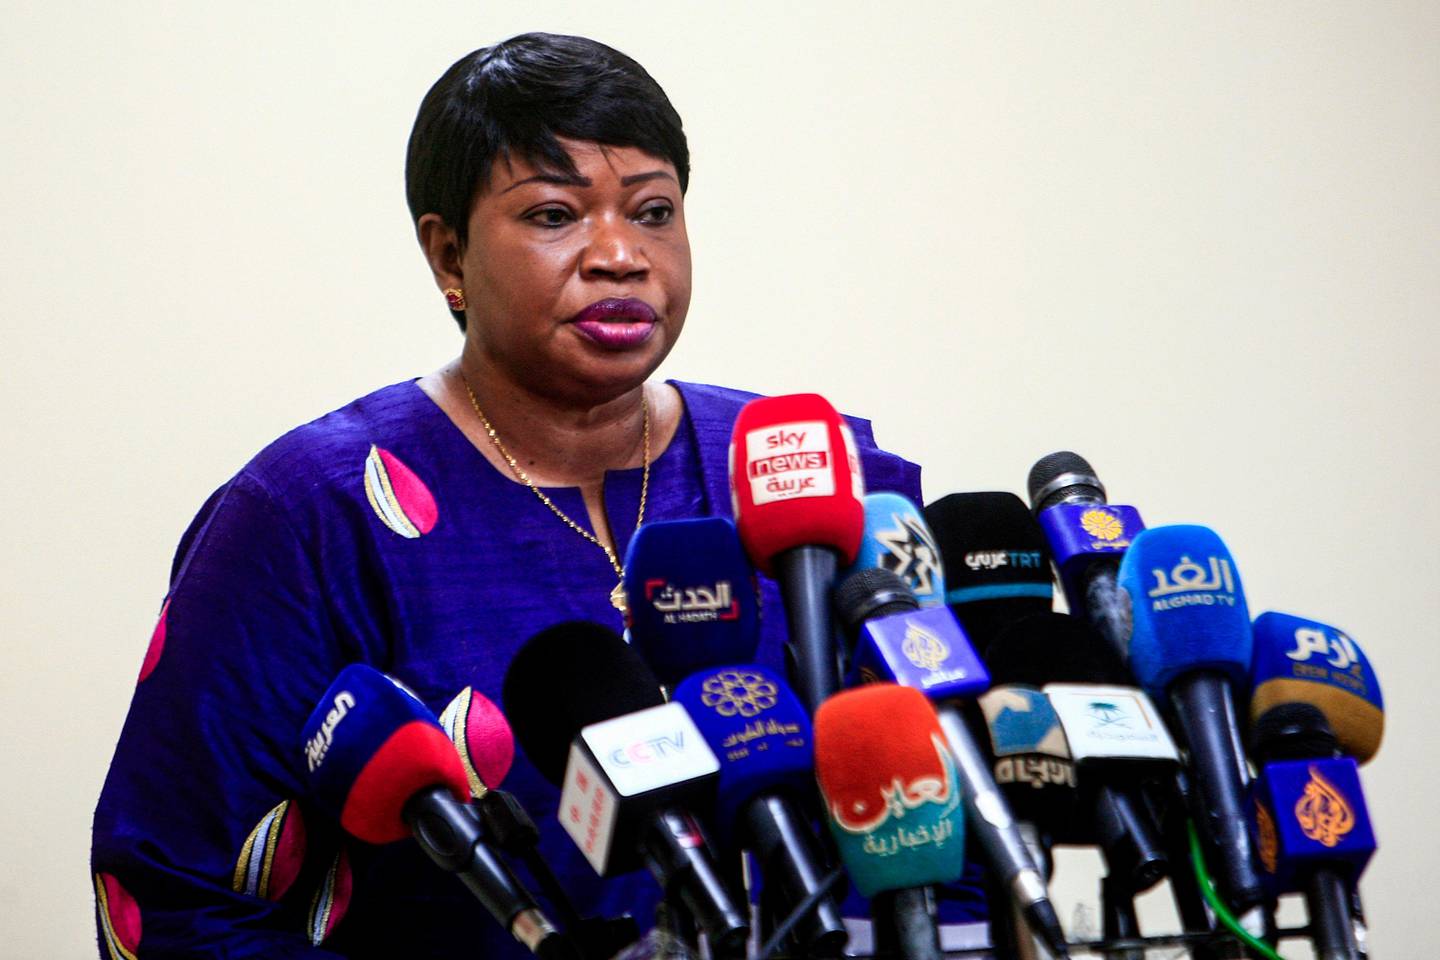 The International Criminal Court's prosecutor Fatou Bensouda gives a press conference in Sudan's capital Khartoum on October 20, 2020, at the conclusion of her five-day visit to the country. - The International Criminal Court prosecutor arrived in Sudan on an official visit to discuss the potential extradition of former president Omar al-Bashir. The toppled autocrat is wanted by the ICC on charges of genocide and crimes against humanity in the western region of Darfur. (Photo by Ebrahim HAMID / AFP)